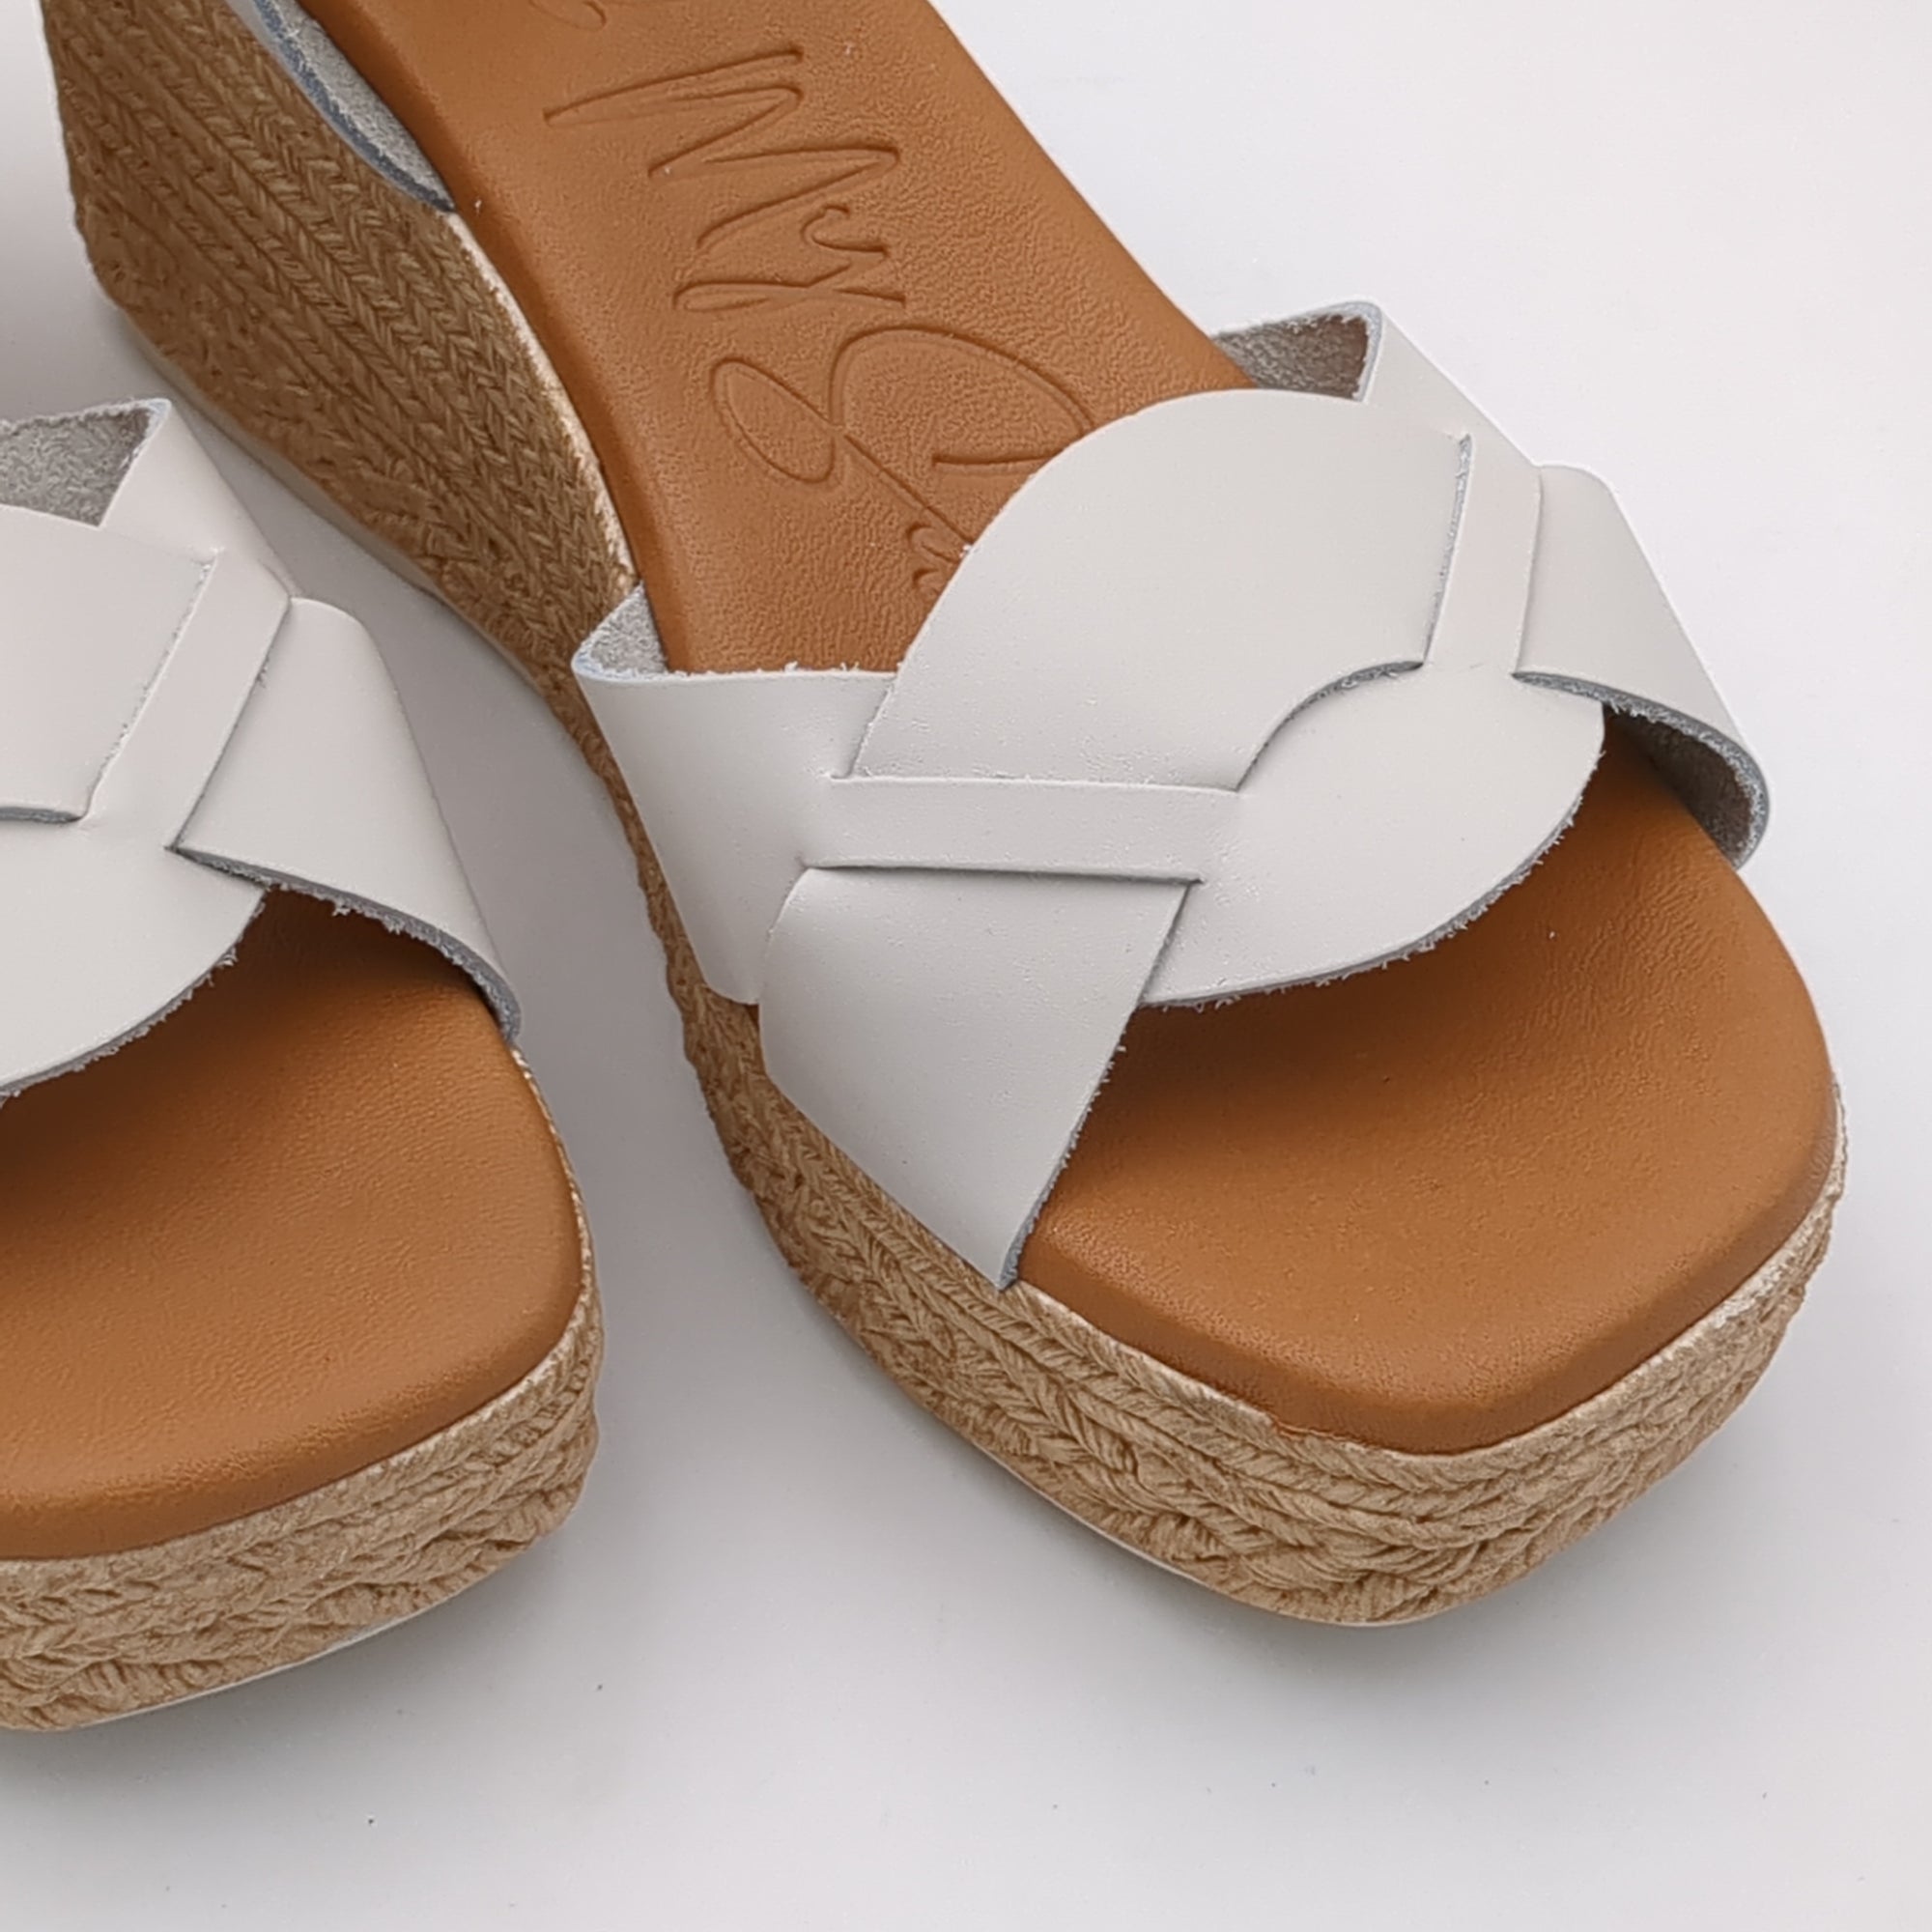 Front view of Oh My Sandals 5460 HIELO cream wedge sandals showing the unique crossover strap.